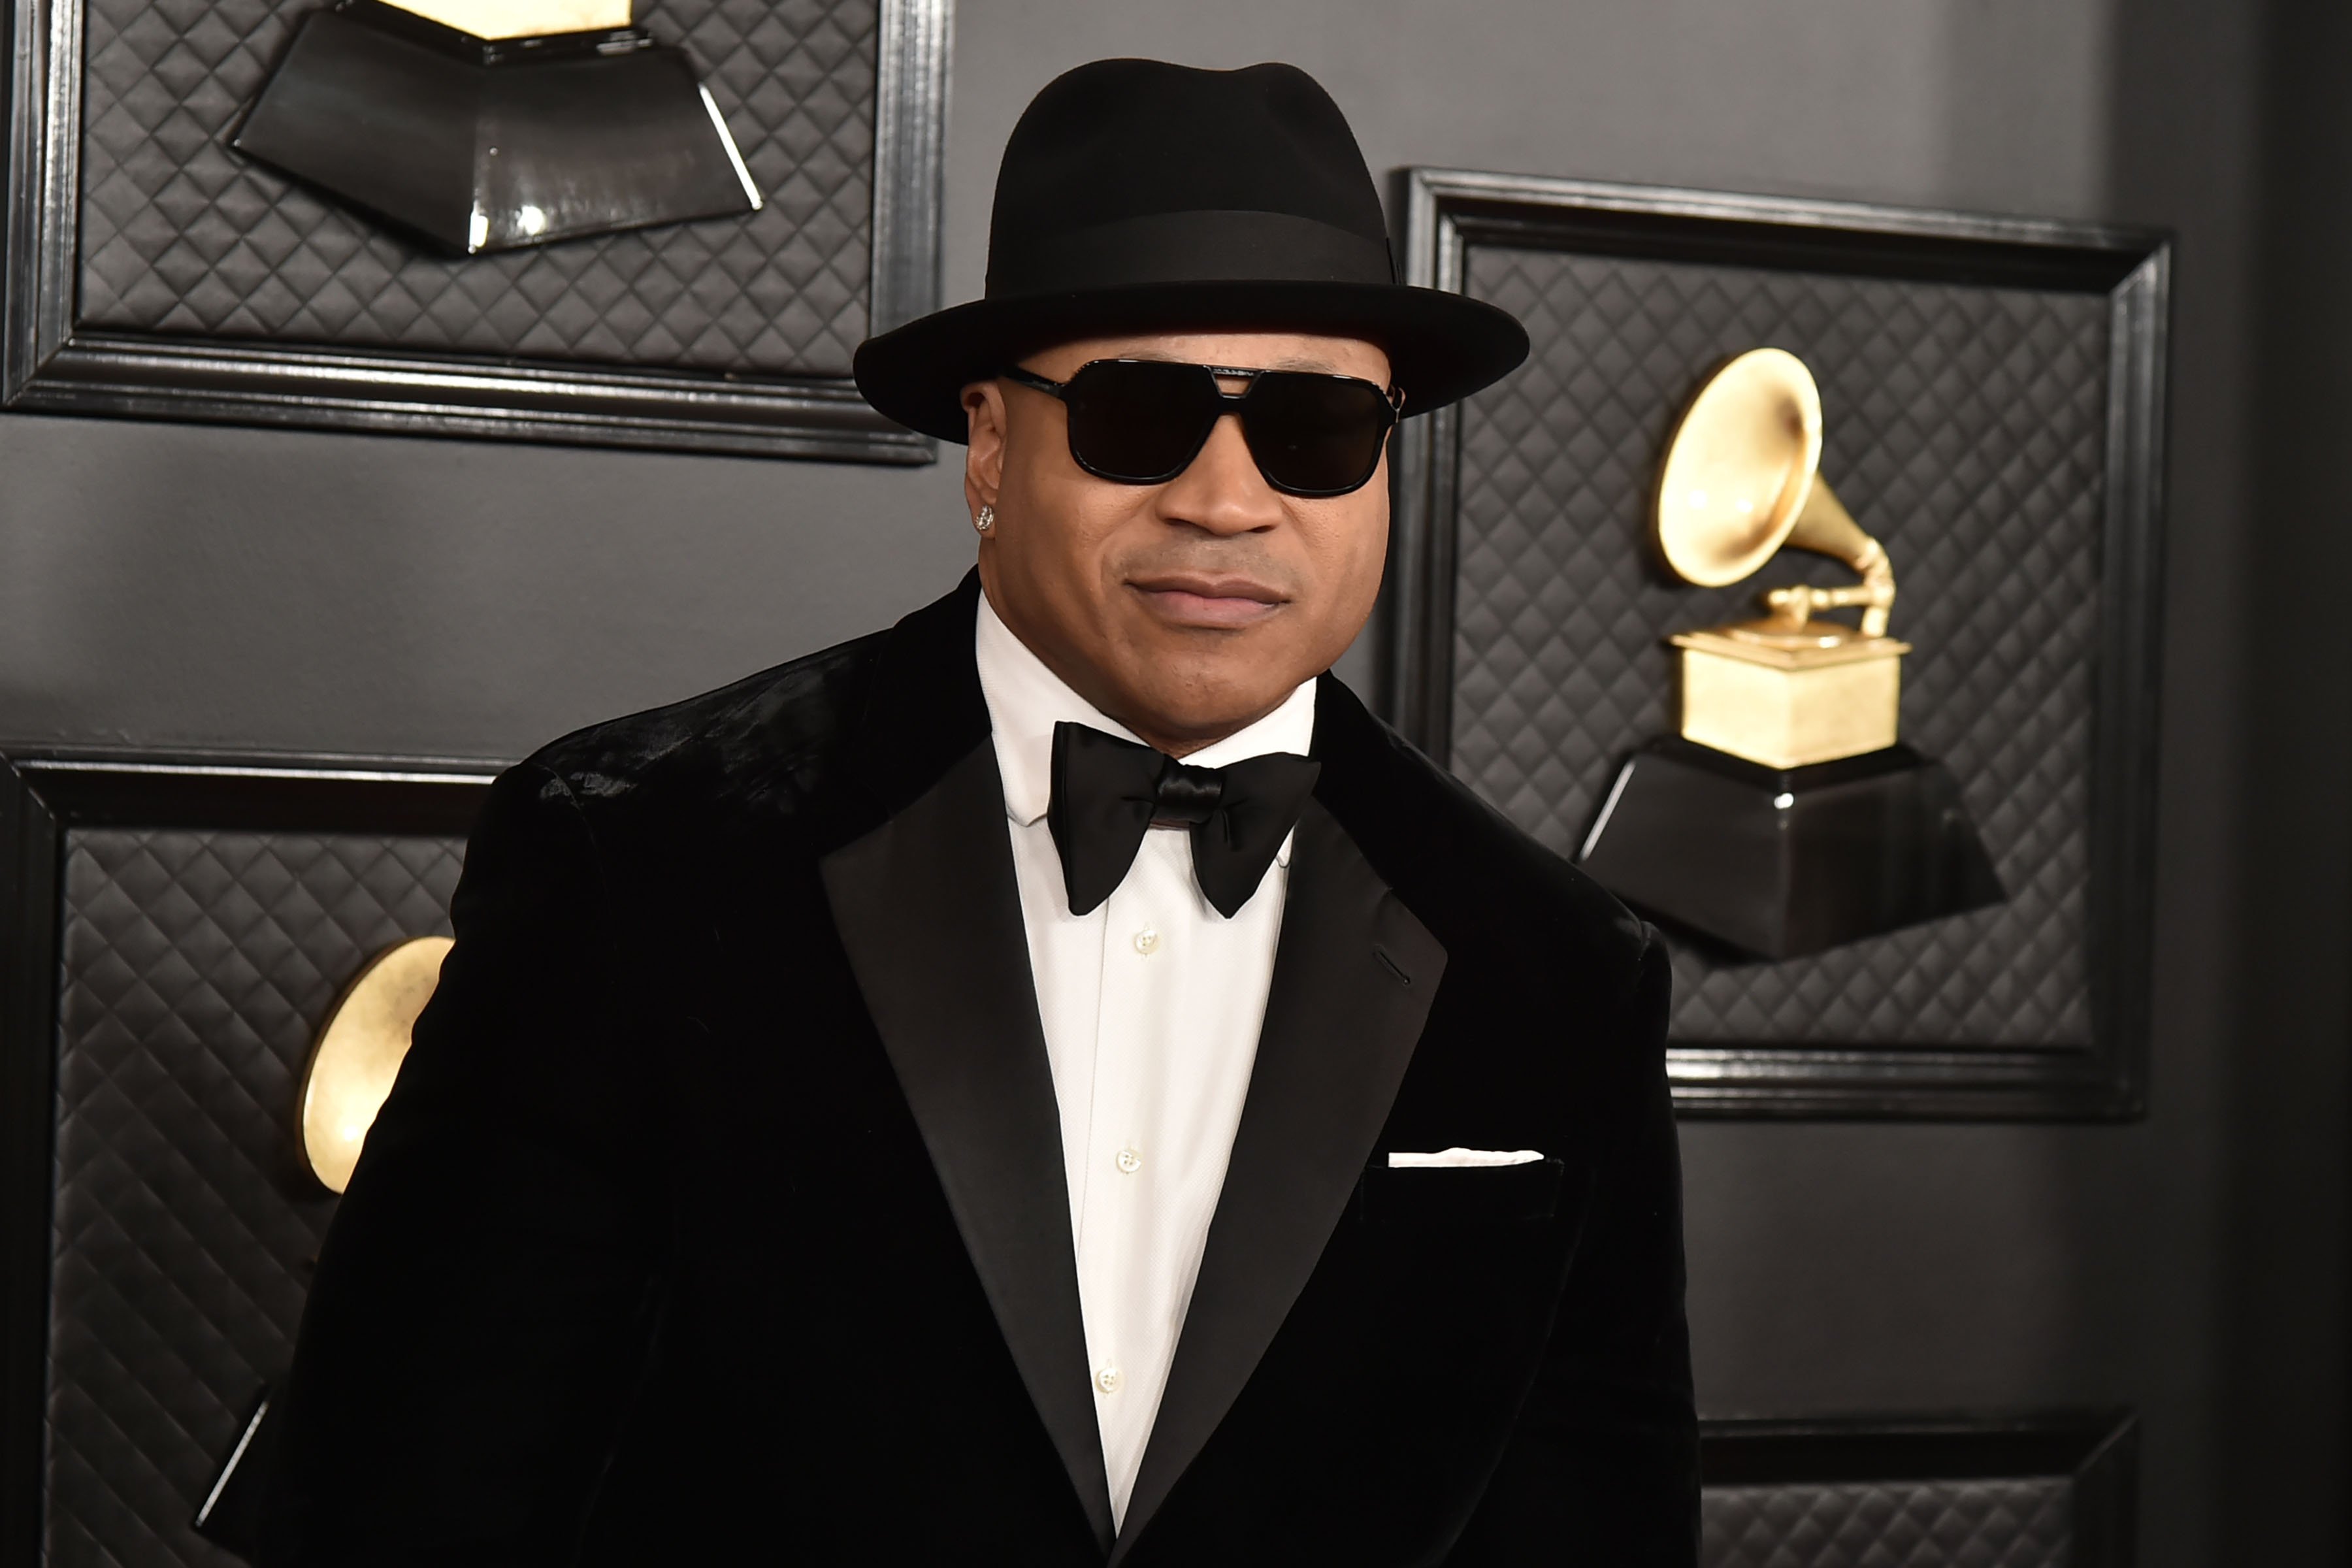 LL Cool J at the 62nd Annual Grammy Awards at the Staples Center on January 26, 2020 in Los Angeles, California | David Crotty/Patrick McMullan via Getty Images